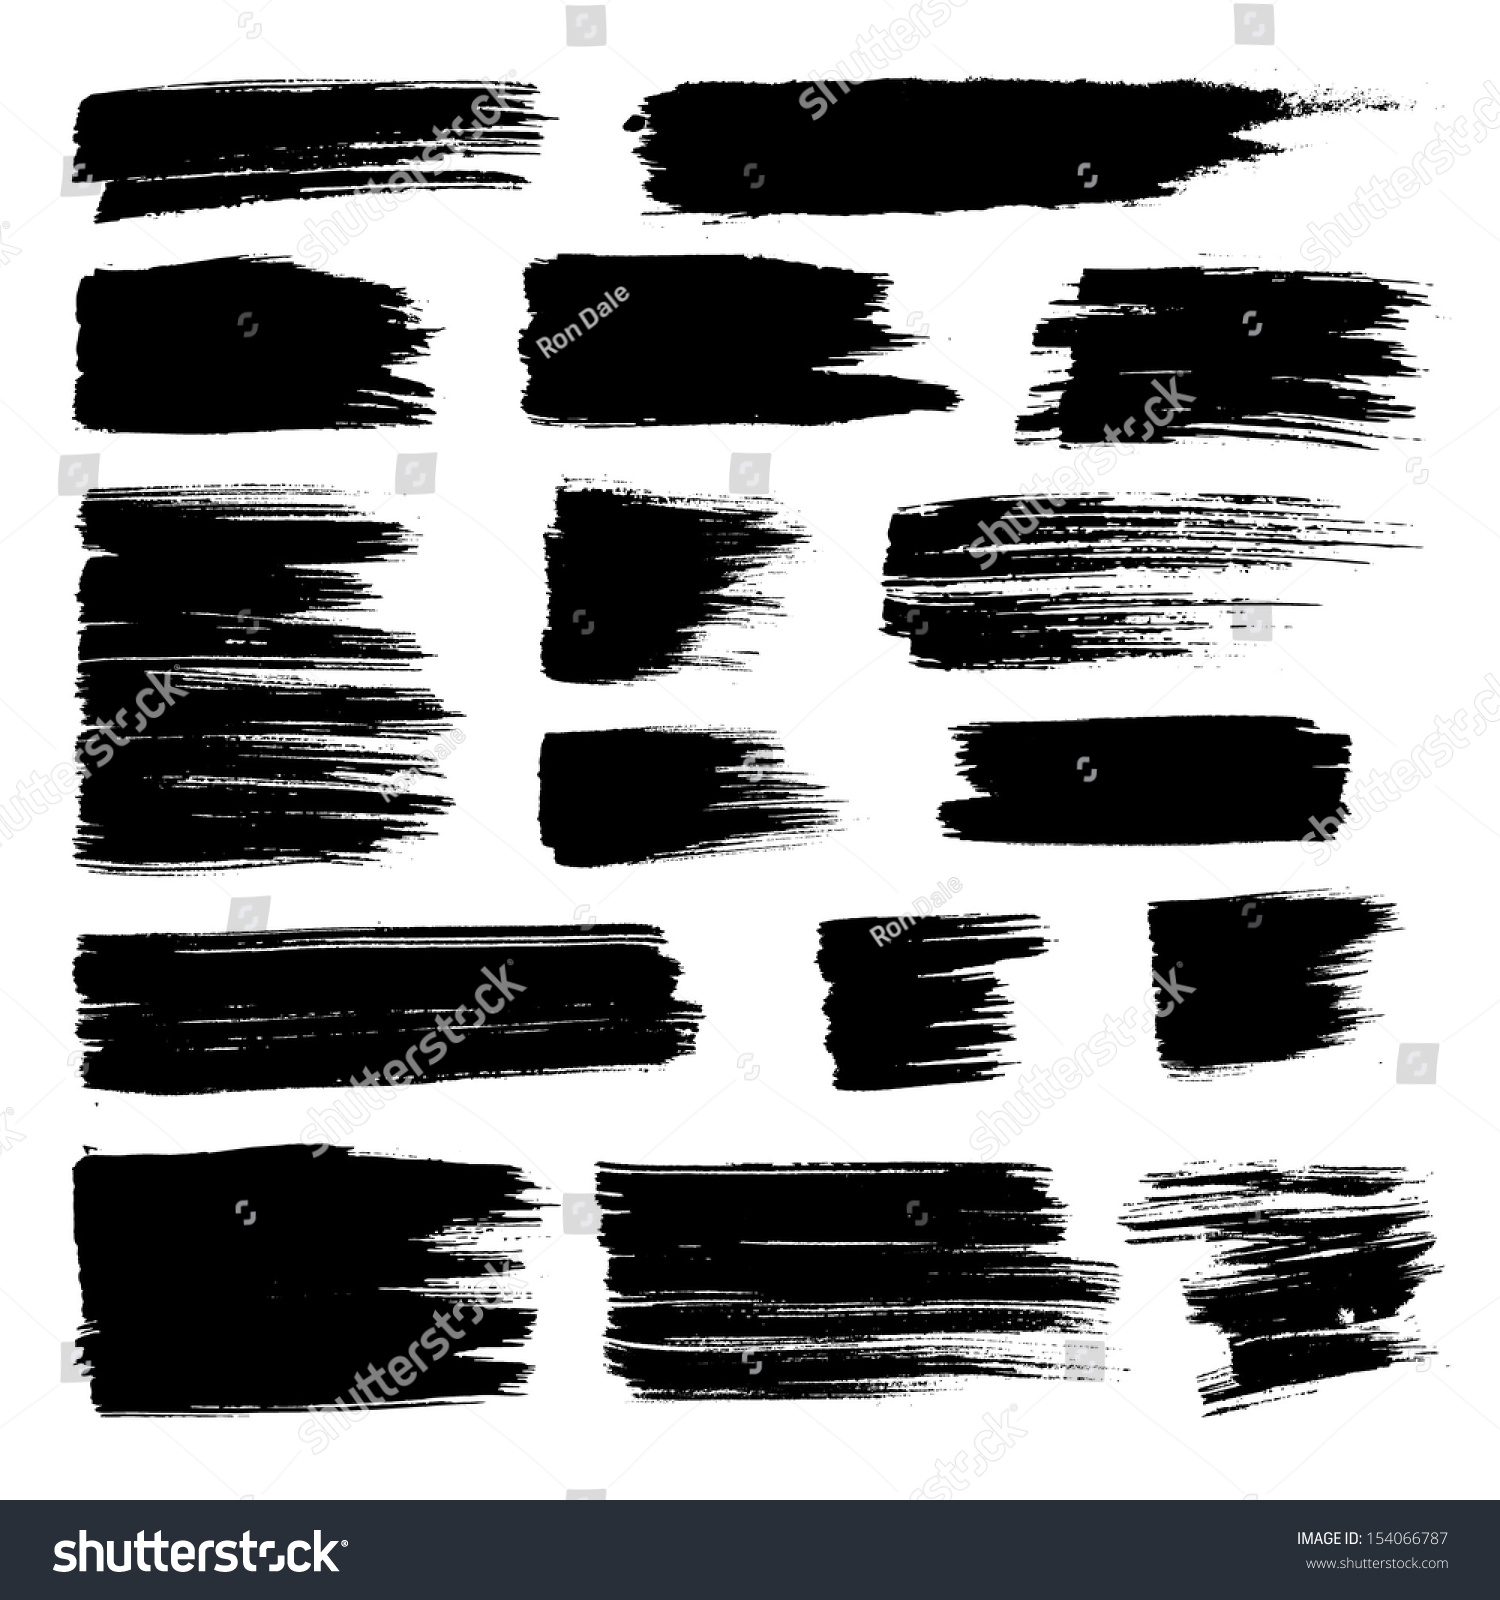 Vector Set Of Grunge Watercolor Broad Brush Strokes. Black Collection ...